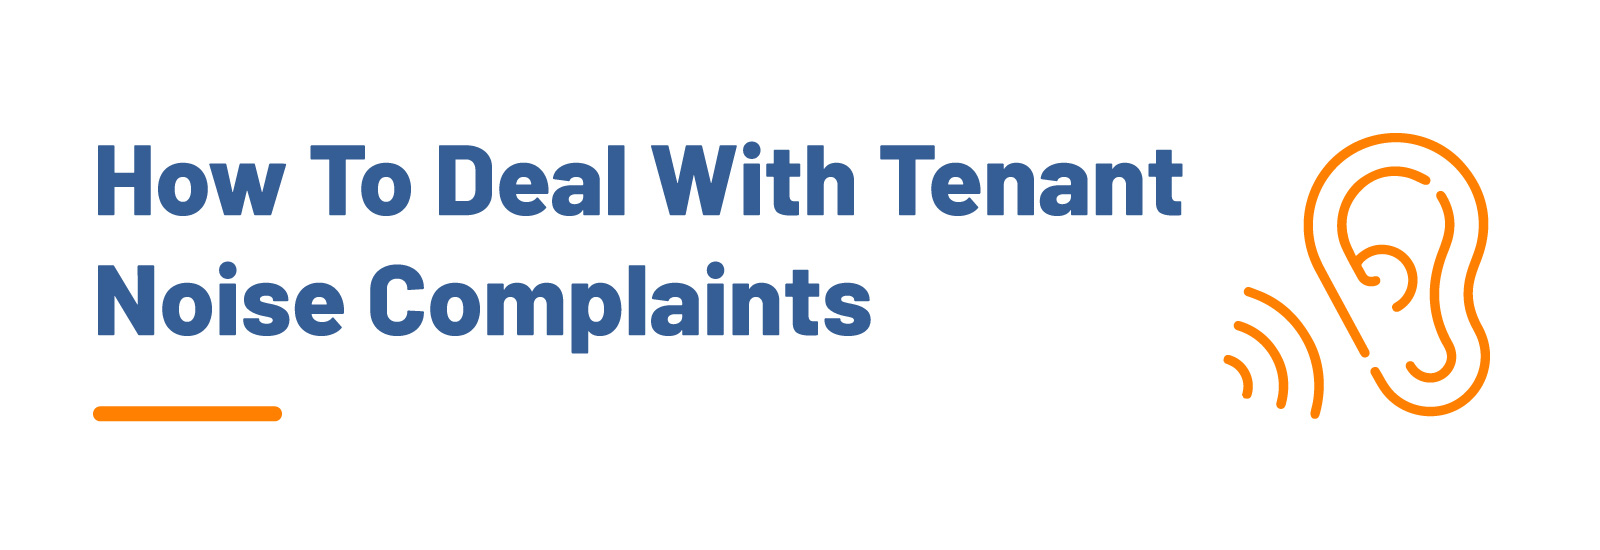  How To Deal With Tenant Noise Complaints